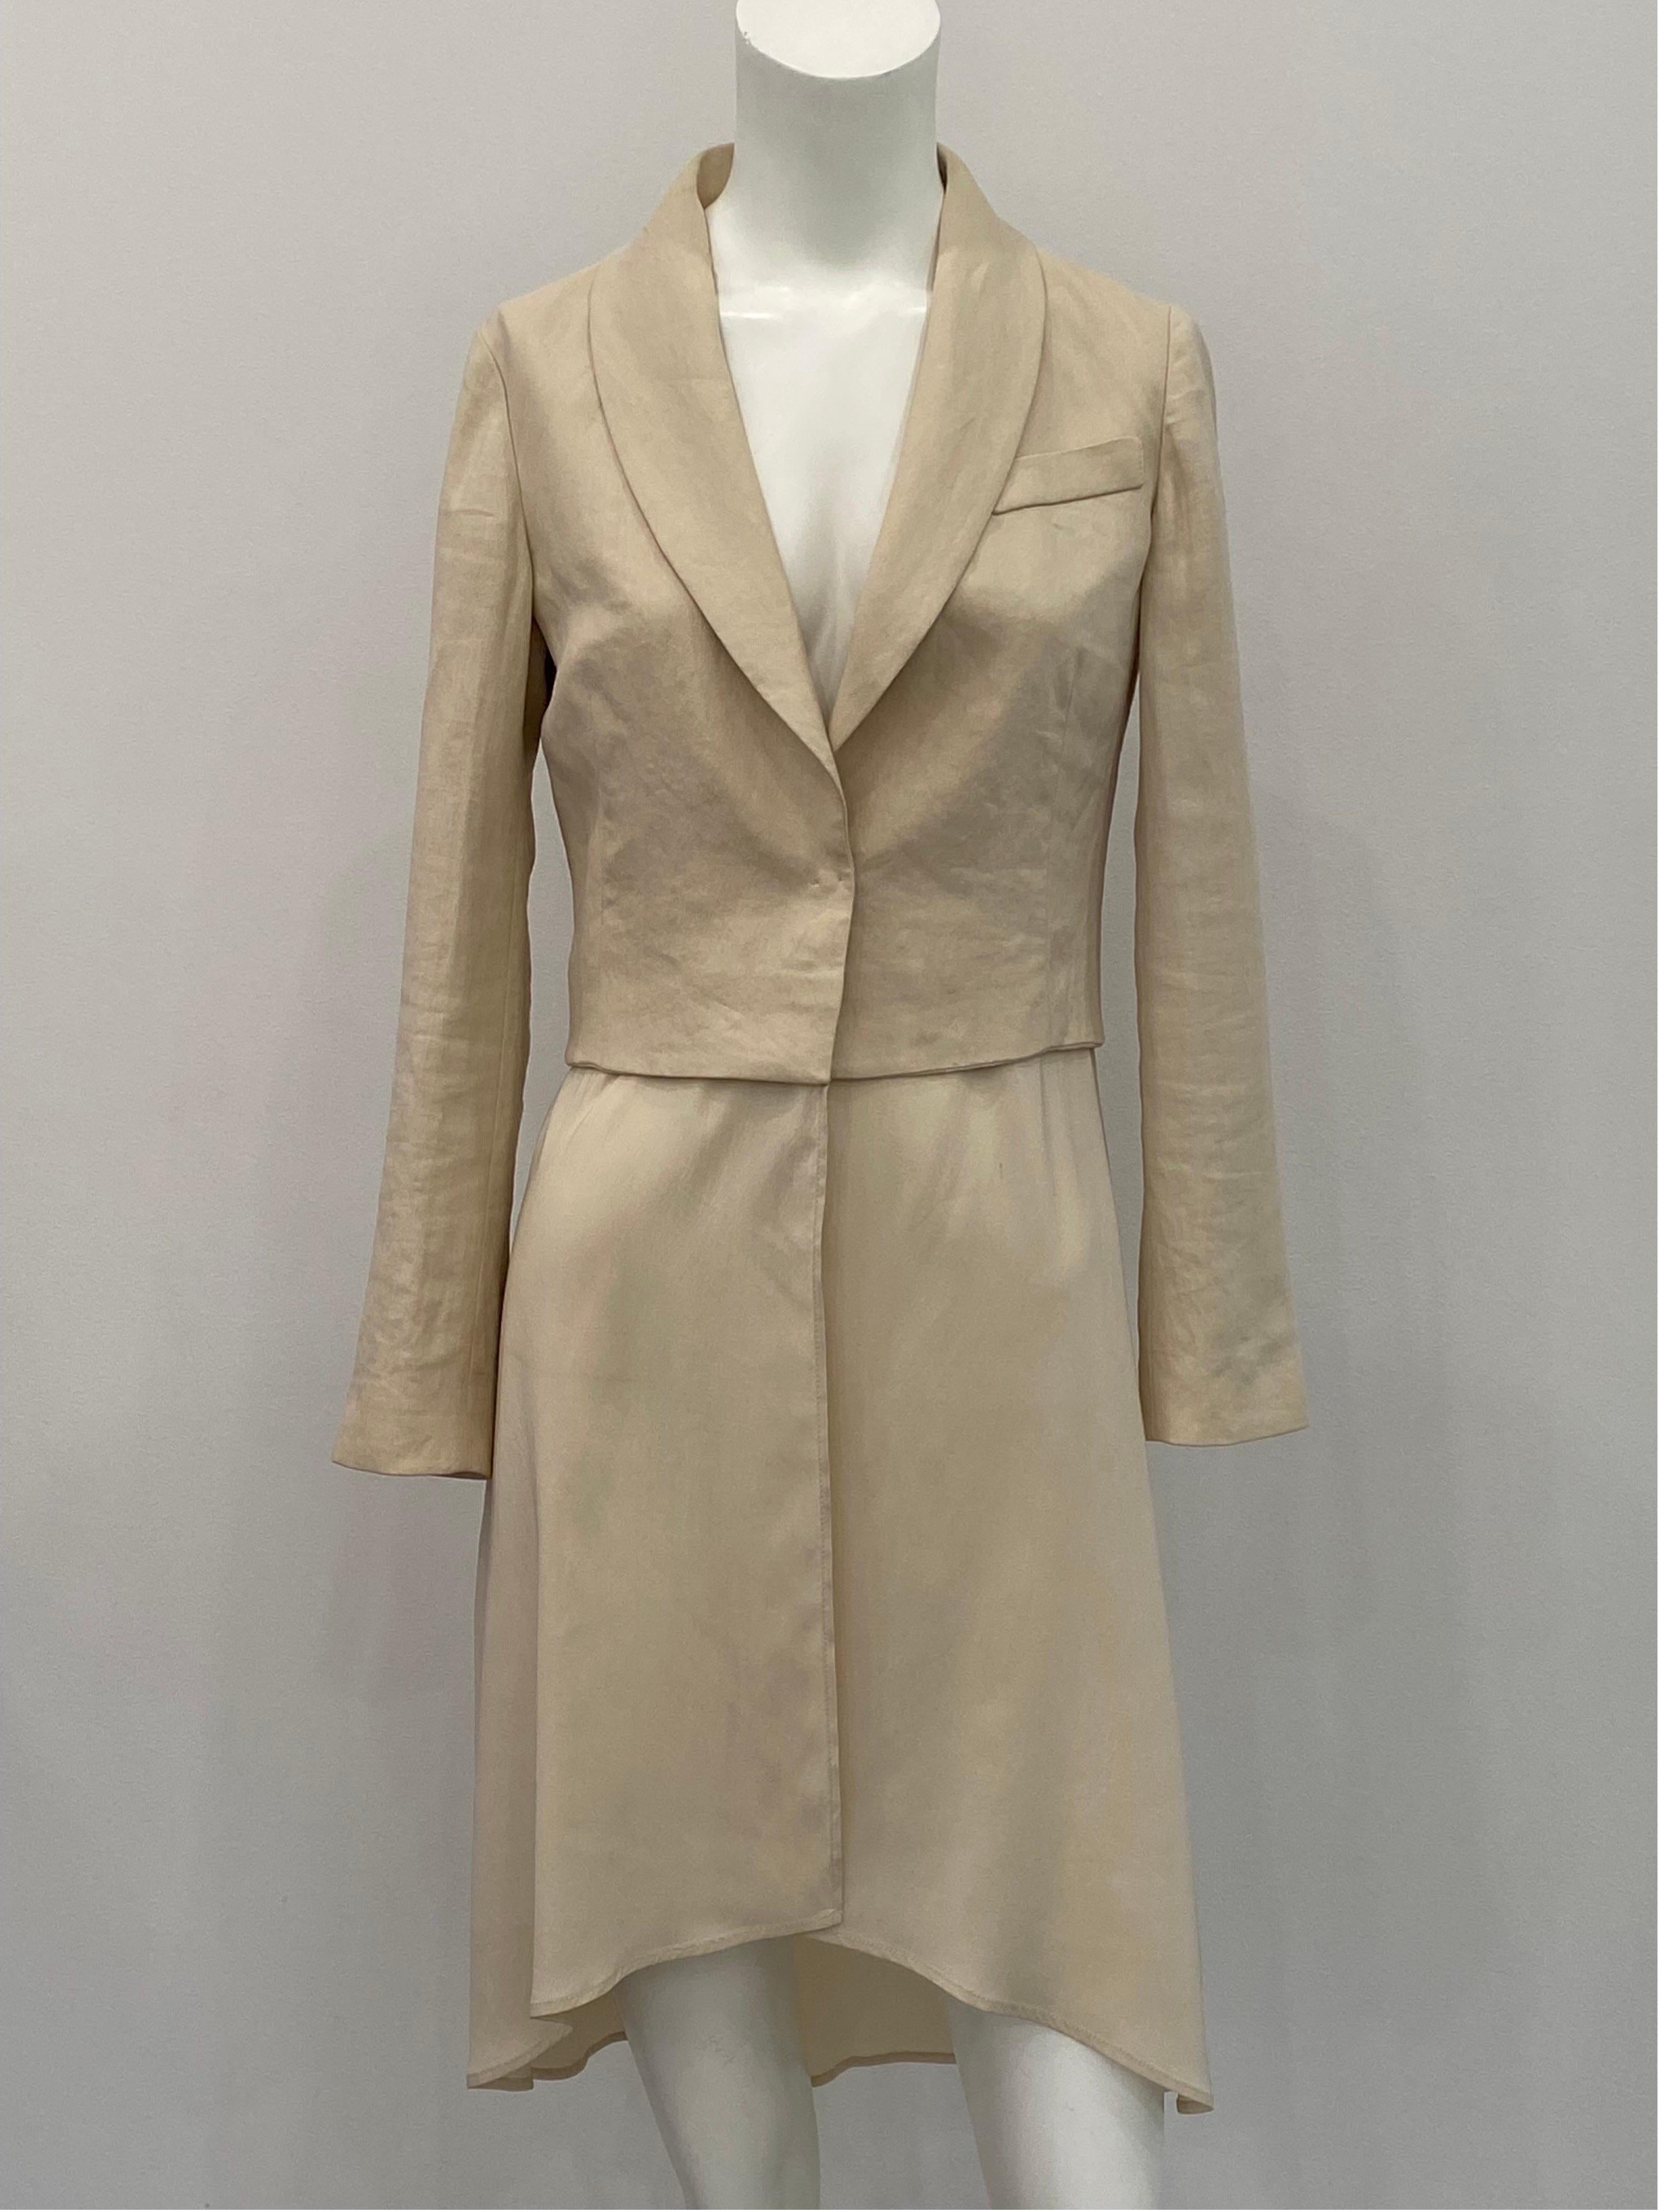 Brunello Cucinelli Beige Cotton with Chiffon Bottom Long Jacket - Sz 38. This very chic cotton and chiffon jacket has a long sleeve, 4 button detail at the end of each sleeves, 1 small faux pocket above the left breast area, a rounded v shaped